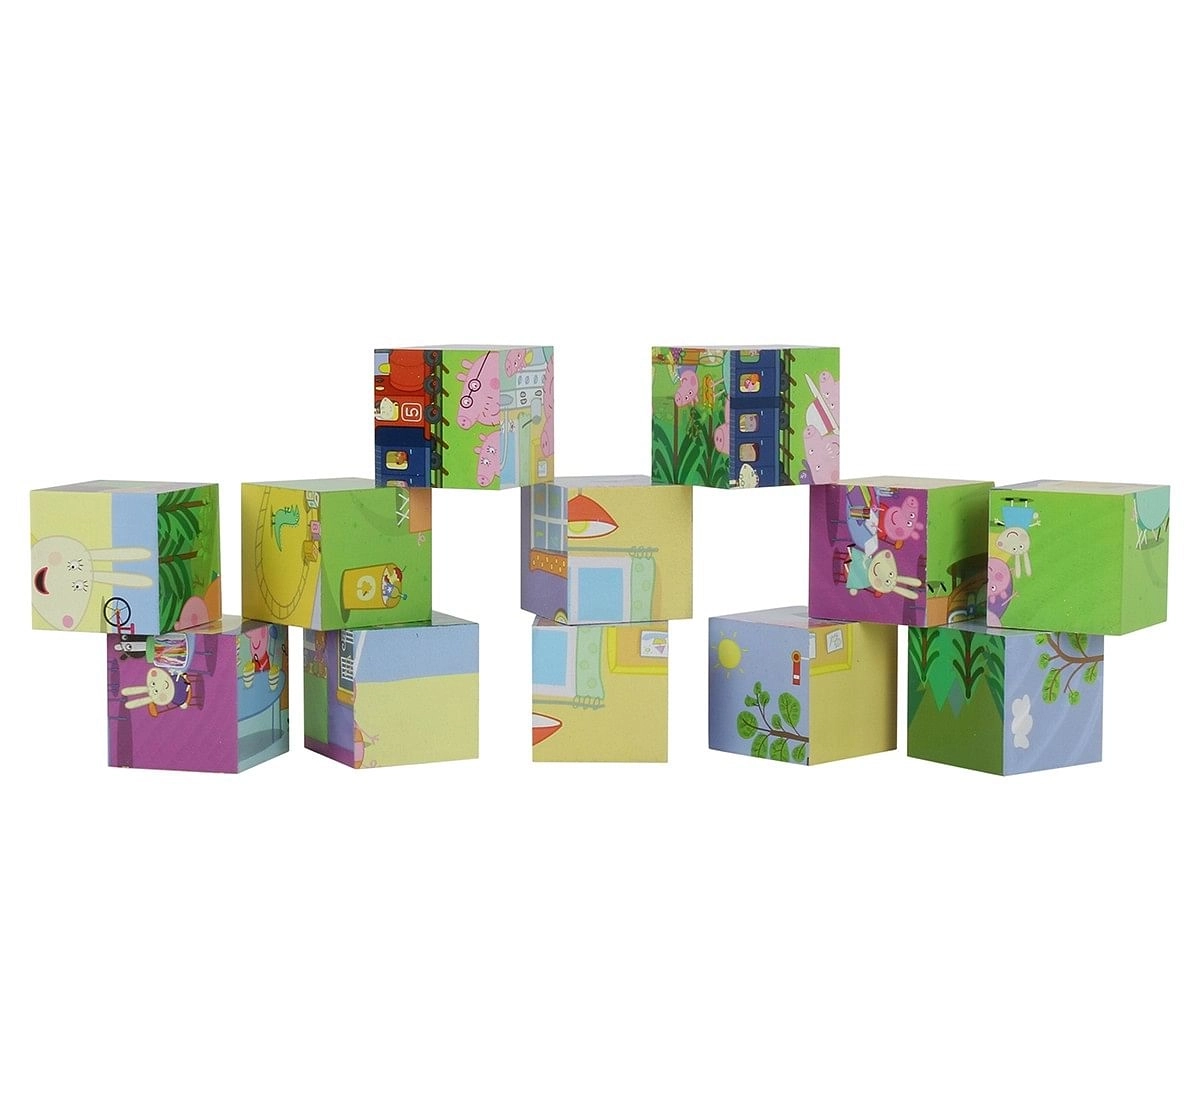 Simba Peppa Pig Picture Cube,  3Y+ (Multicolor)